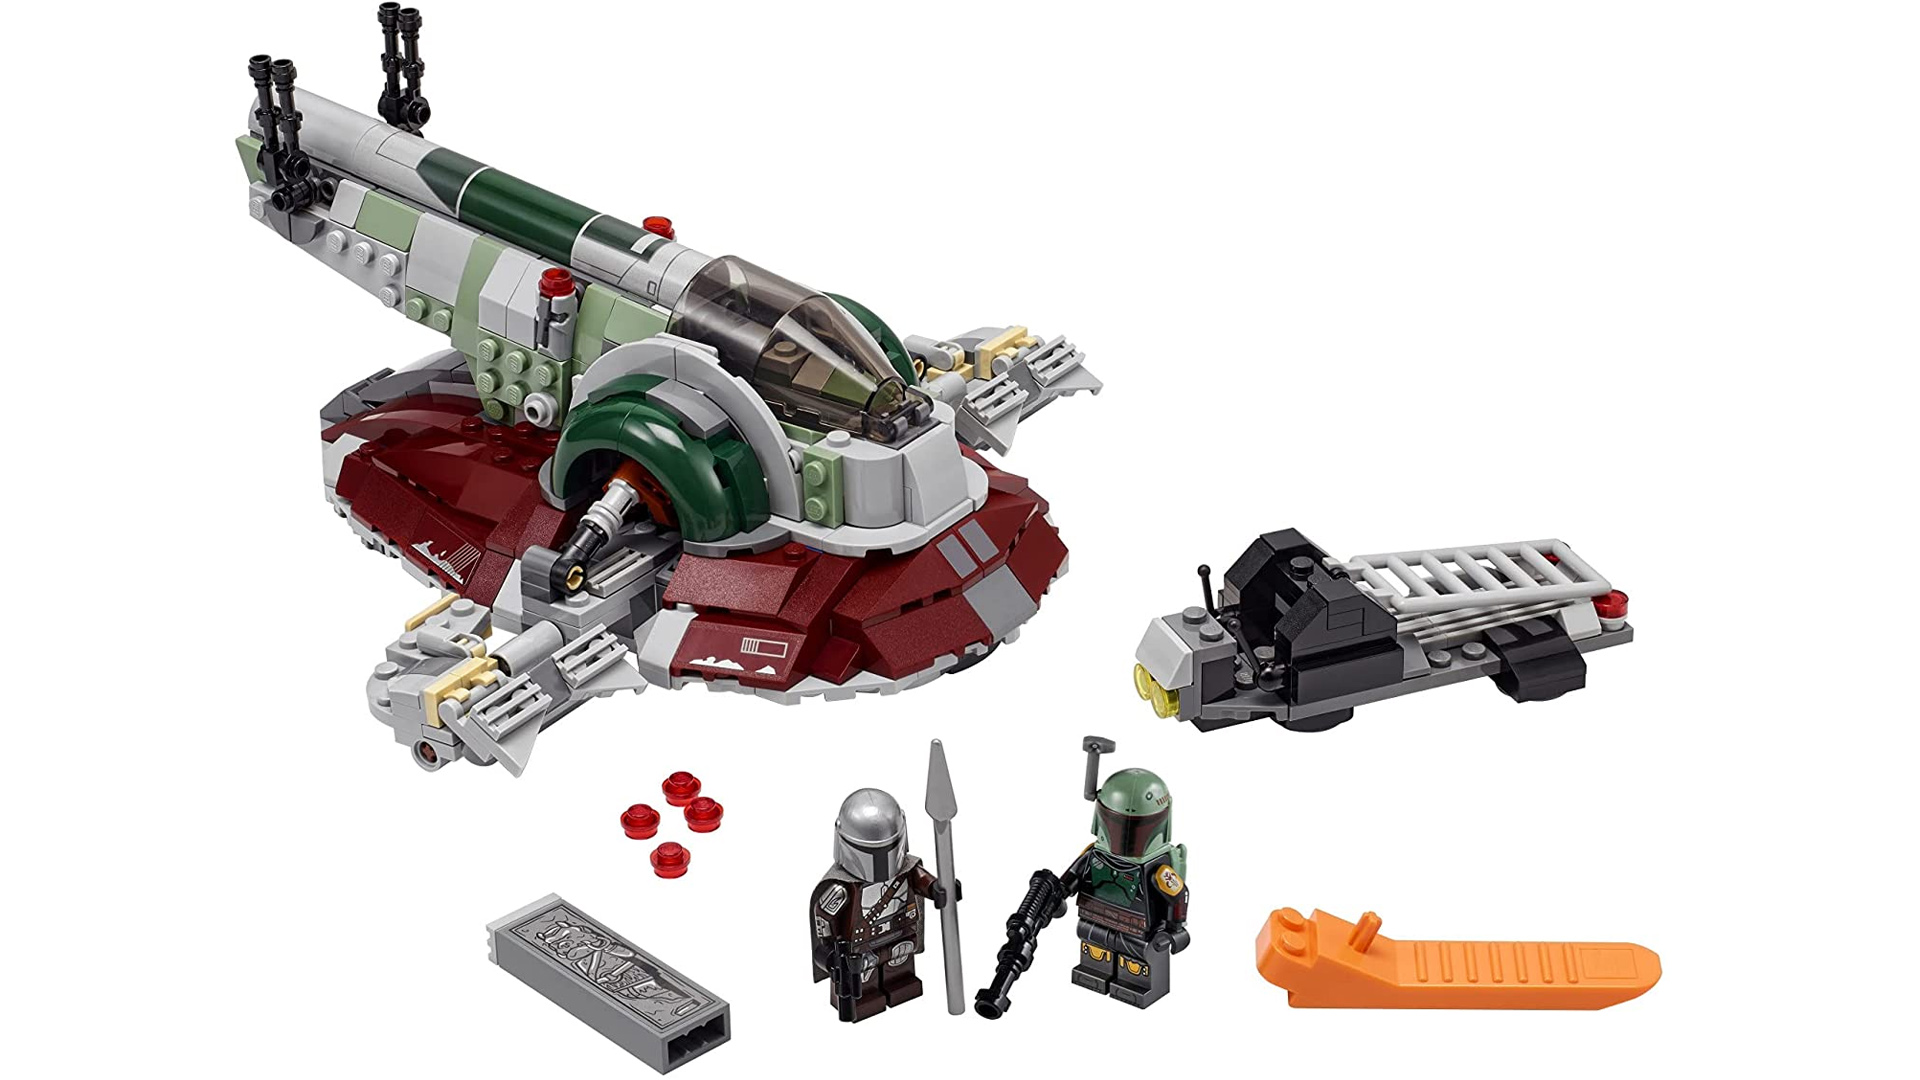 This Lego Star Wars Boba Fett's set is 20% off right now